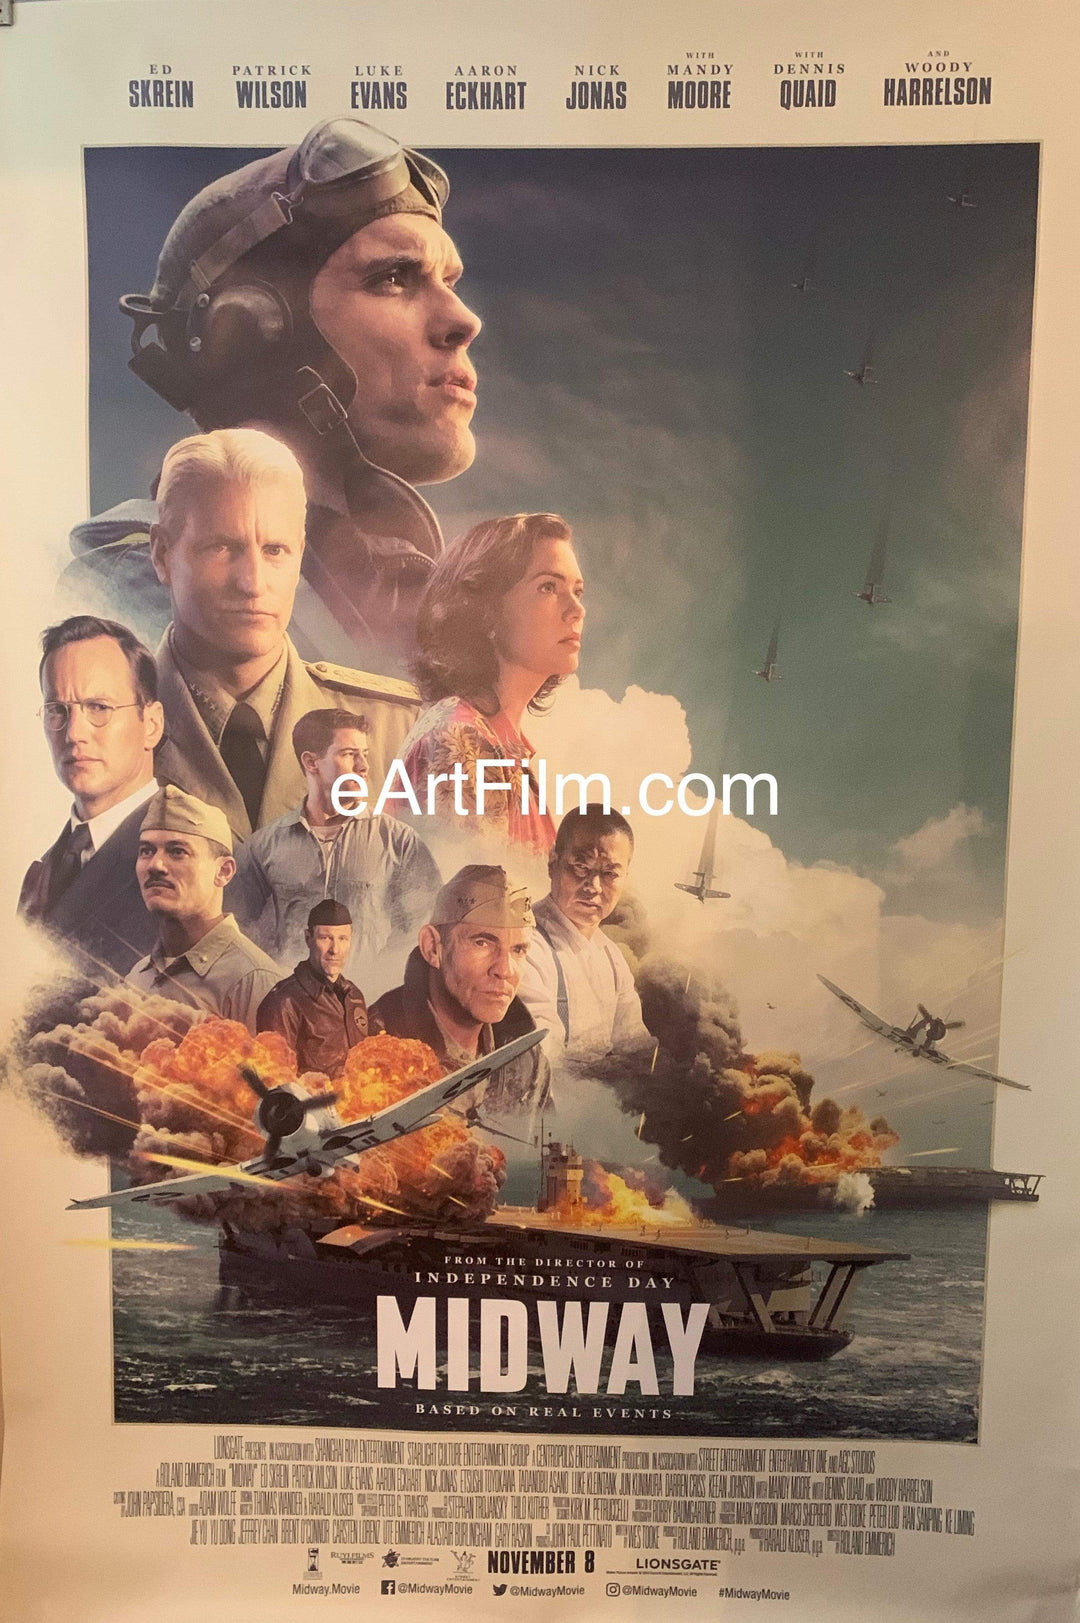 eArtFilm.com U.S Theatrical Release Bus Stop/Shelter Poster approx. 48"x72" Midway 2019 48x72 Pearl Harbor WW2 action drama Woody Harrelson Nick Jonas